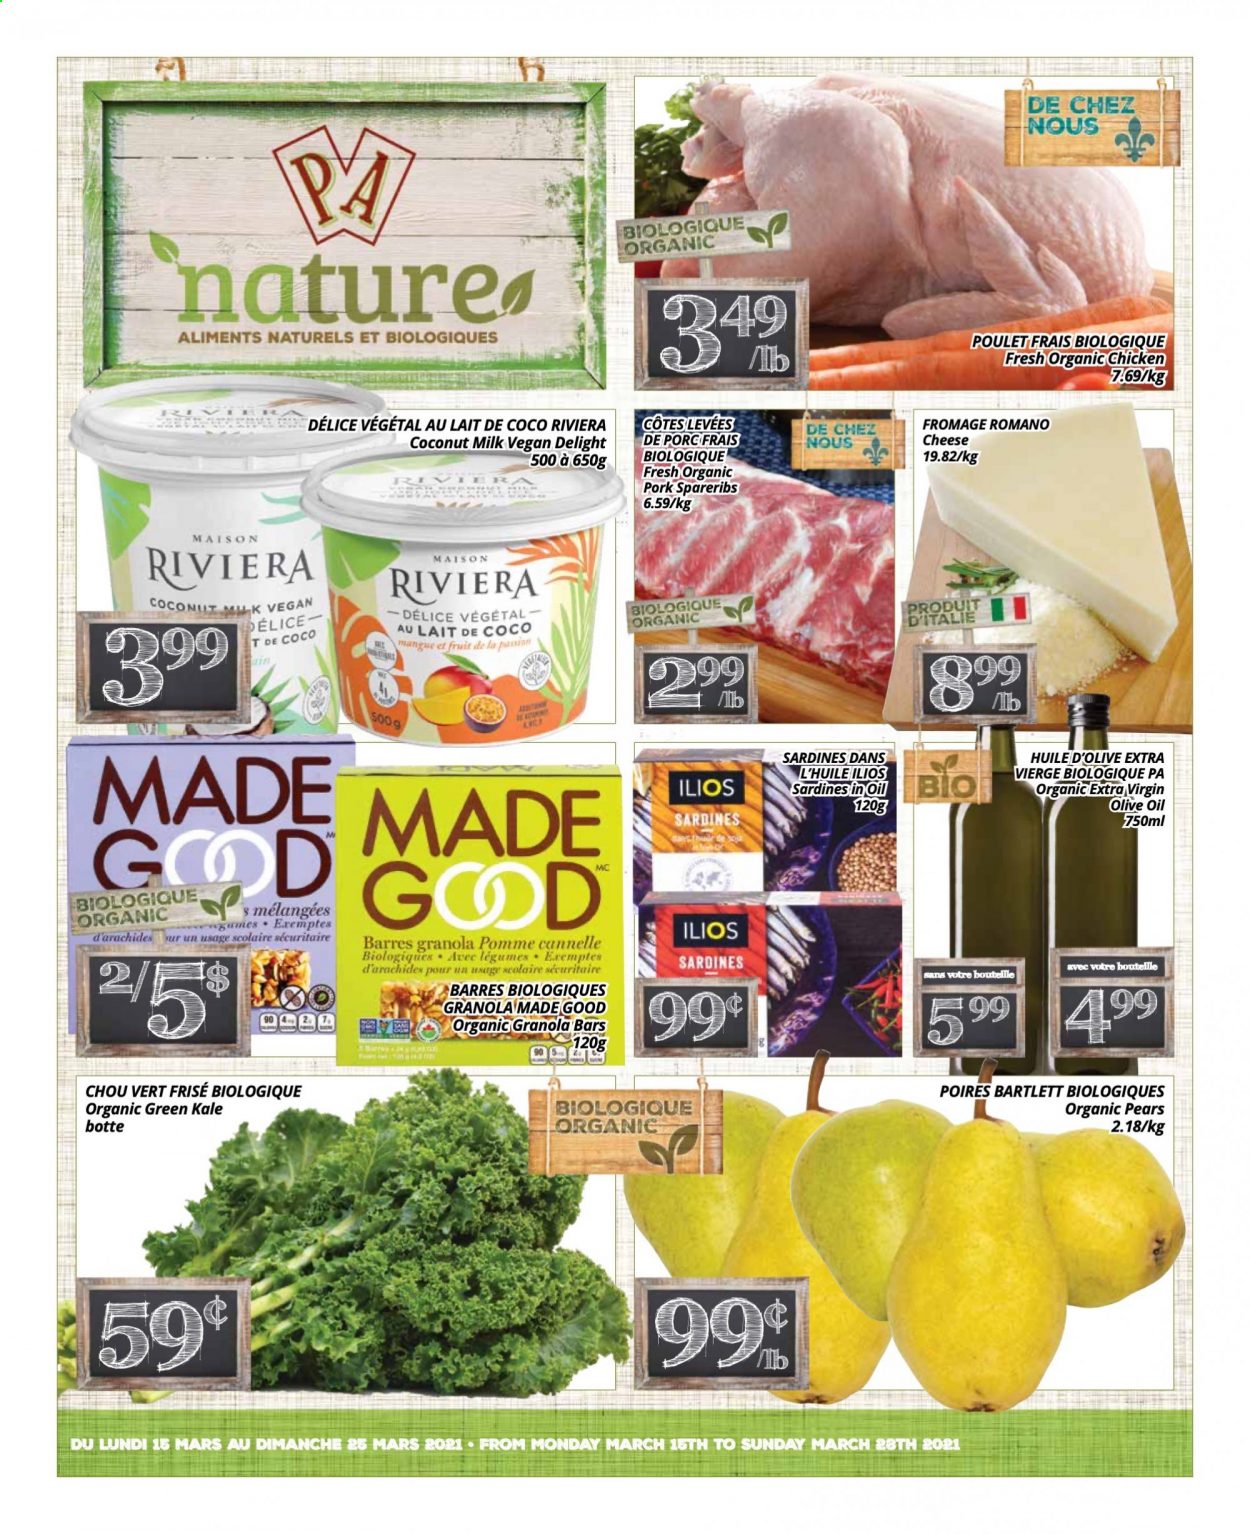 thumbnail - PA Nature Flyer - March 15, 2021 - March 28, 2021 - Sales products - kale, pears, sardines, cheese, Mars, coconut milk, granola bar, extra virgin olive oil, olive oil, pork spare ribs. Page 1.